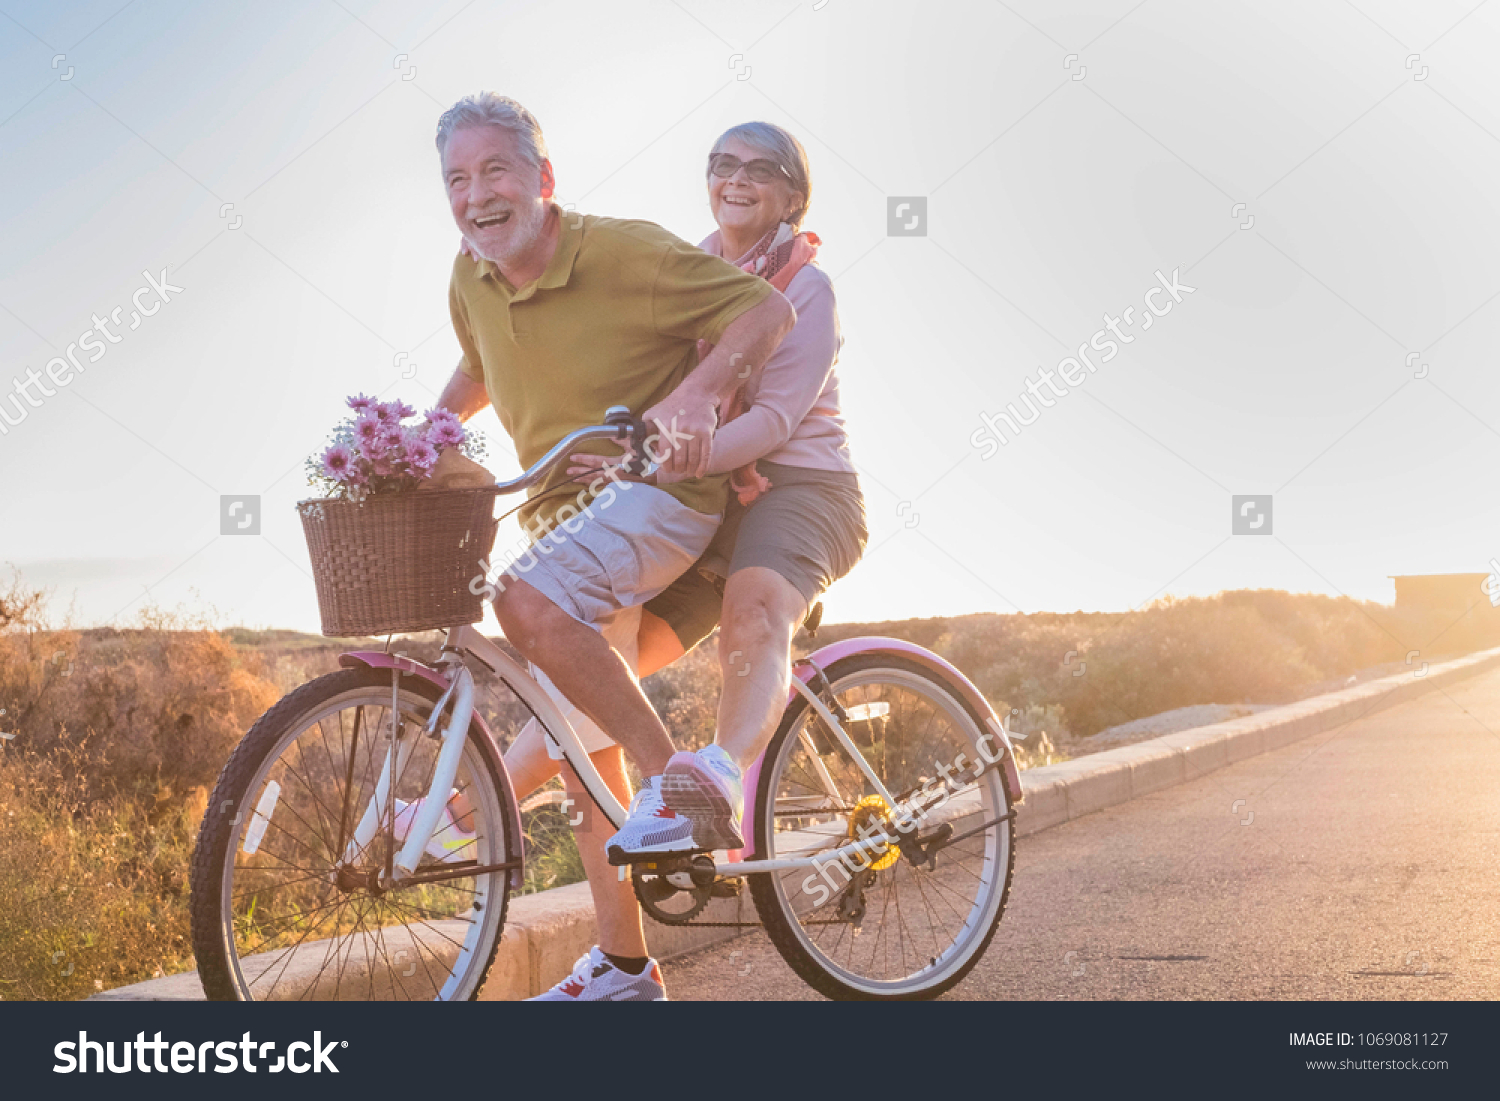 joy and happiness for adult married couple start and have fun traveling on the same bike in outdoor activity with sun backlight on the background. clear and bright image for smile and laugh people.  #1069081127